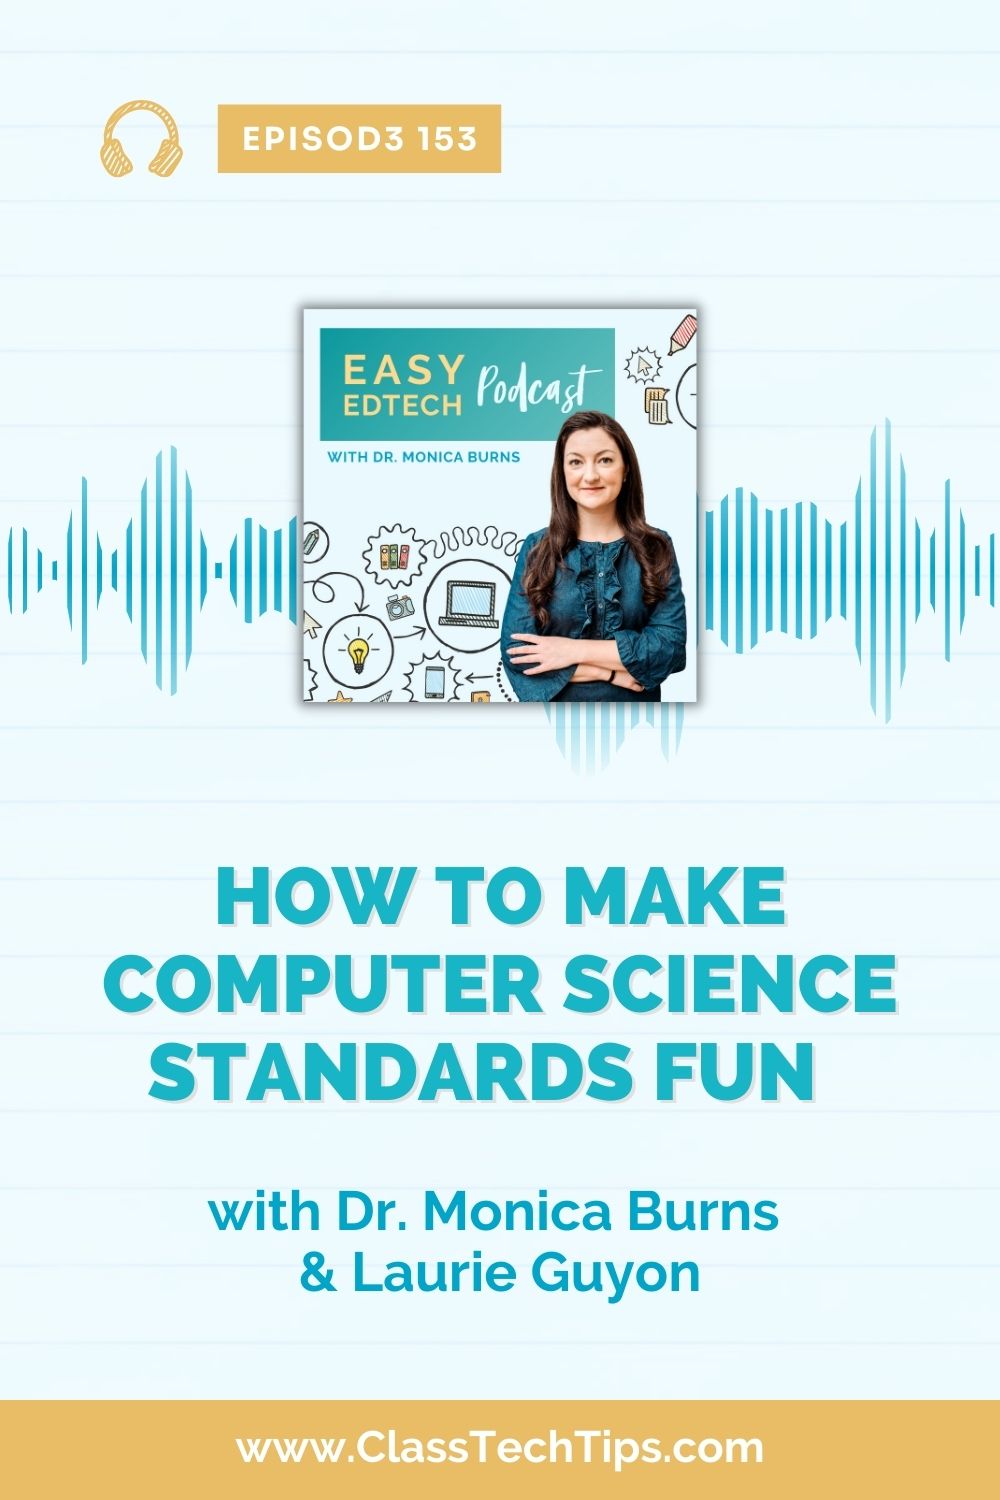 Educator Laurie Guyon joins to discuss how to make computer science standards fun with students of all ages and across subject areas!